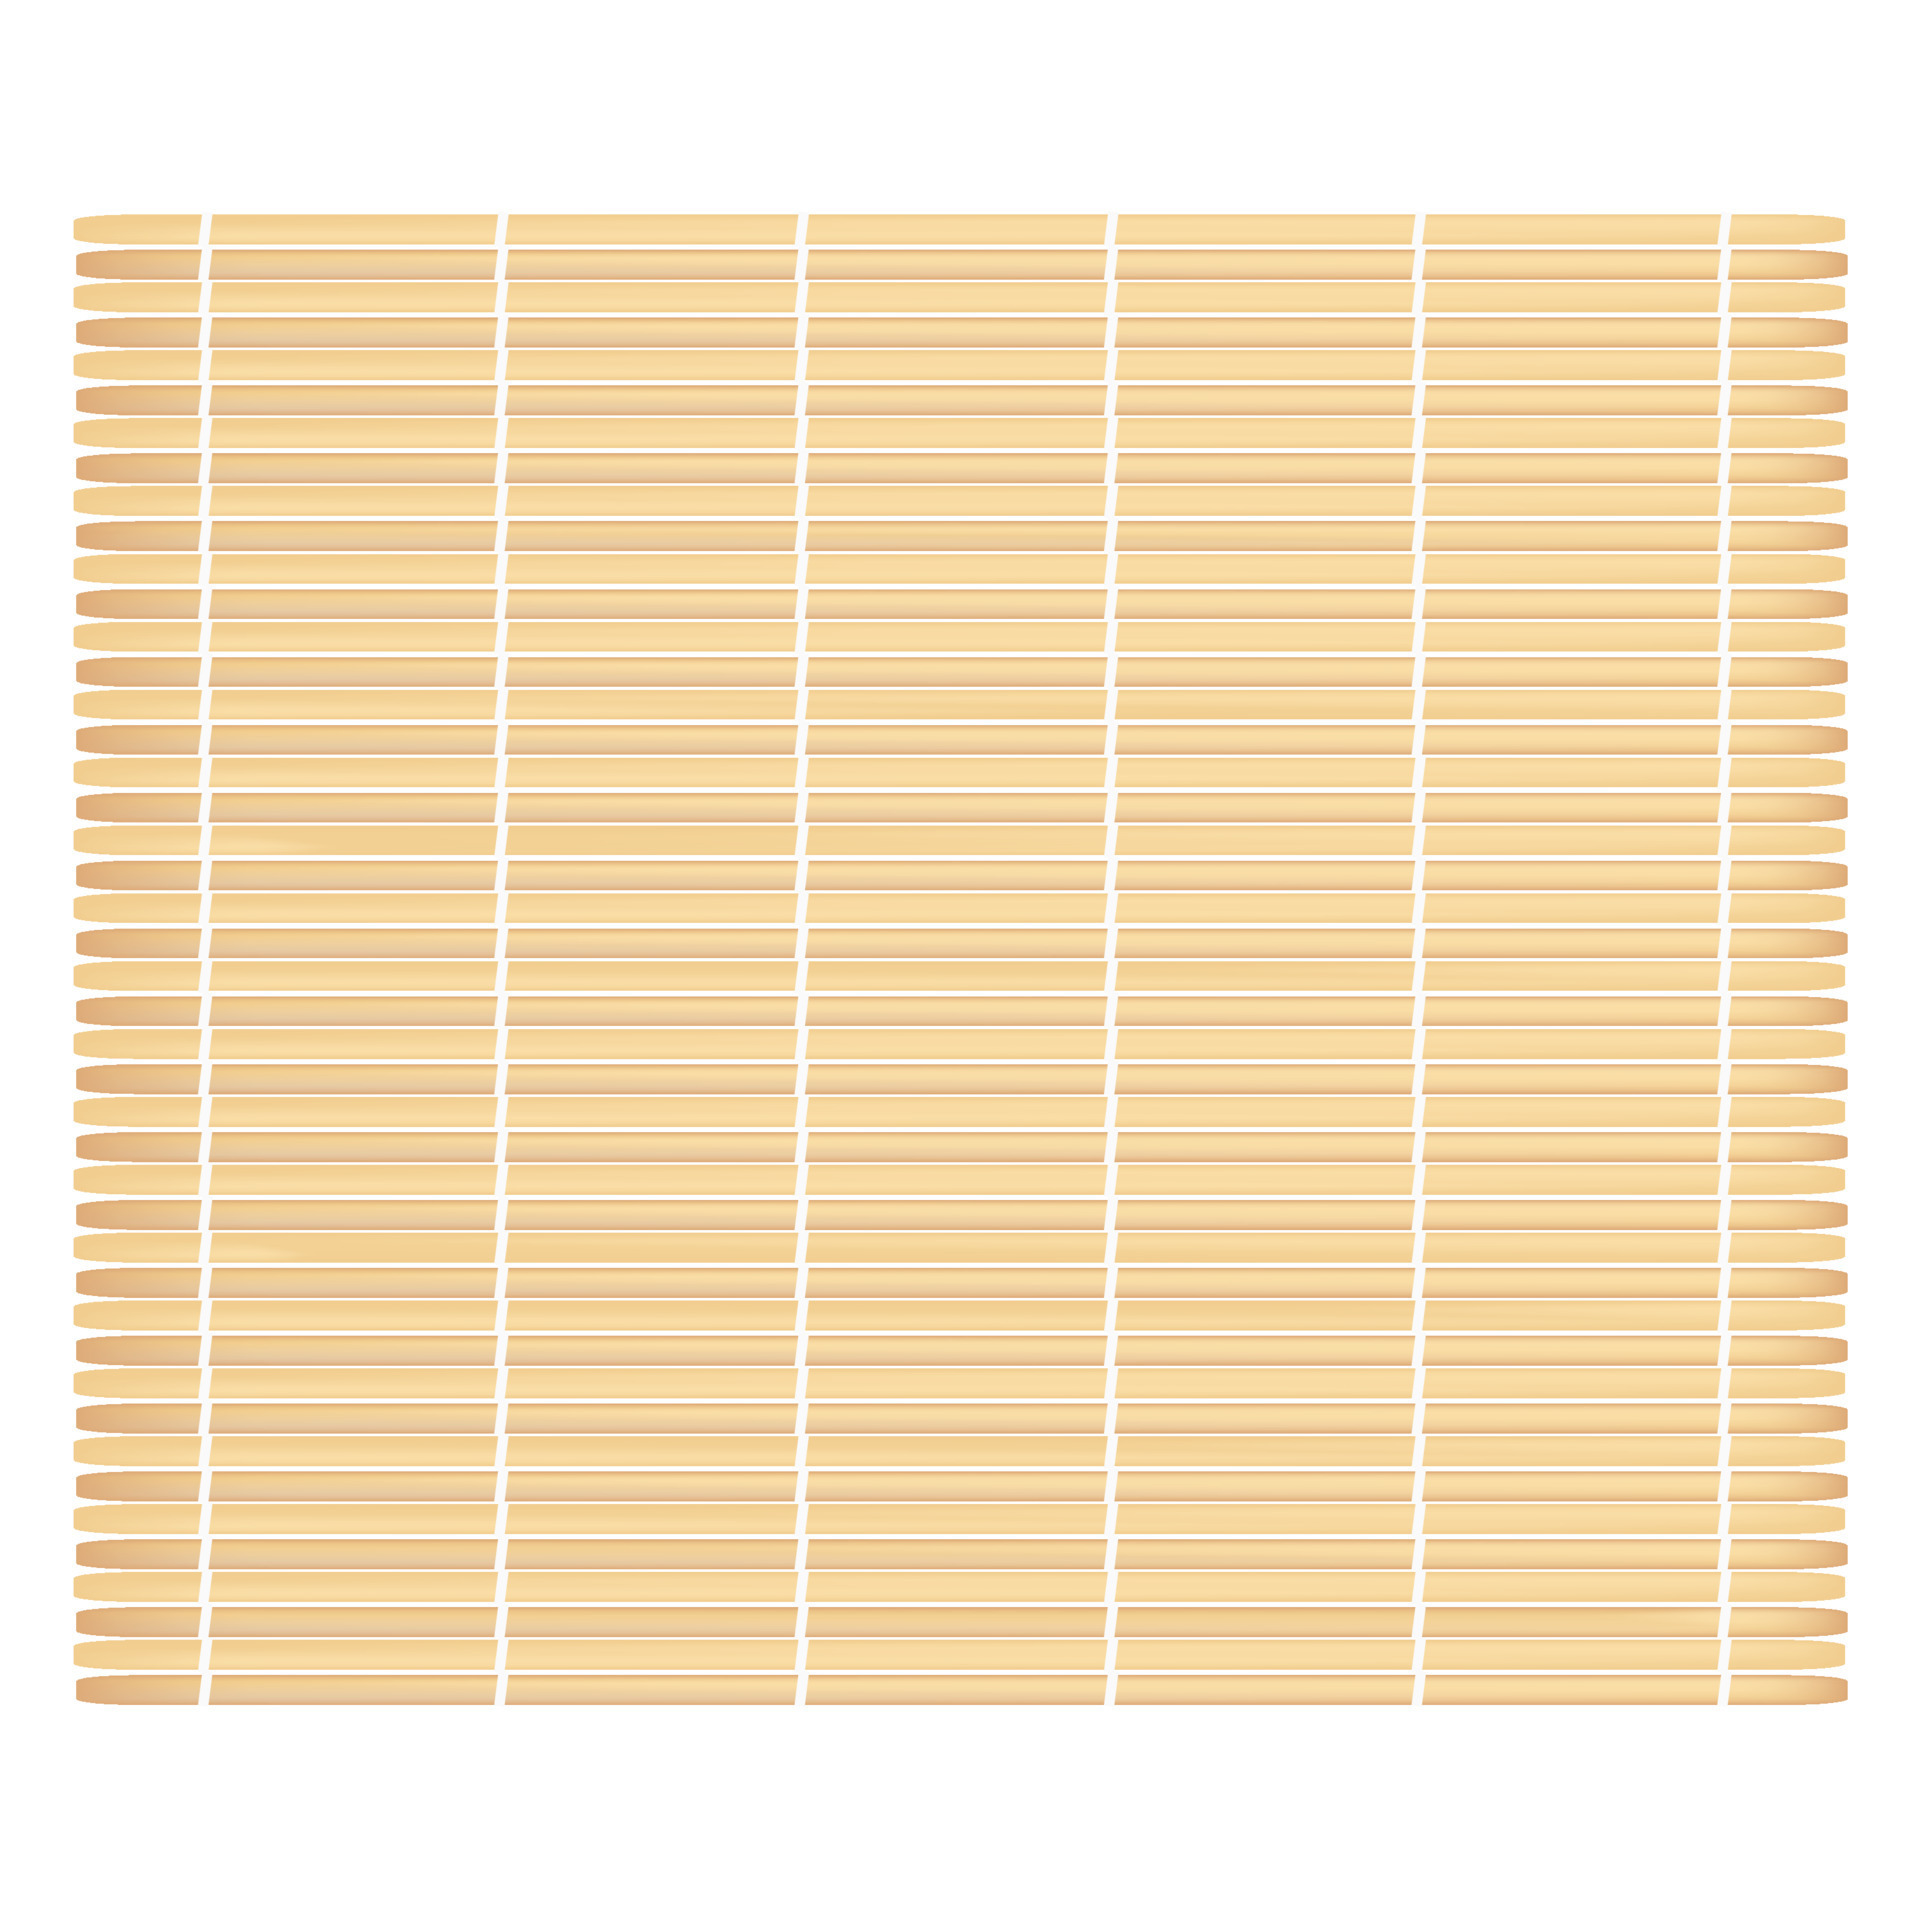 https://static.vecteezy.com/system/resources/previews/015/309/791/original/bamboo-mat-for-sushi-on-a-white-background-ecology-concept-isolated-objects-image-vector.jpg